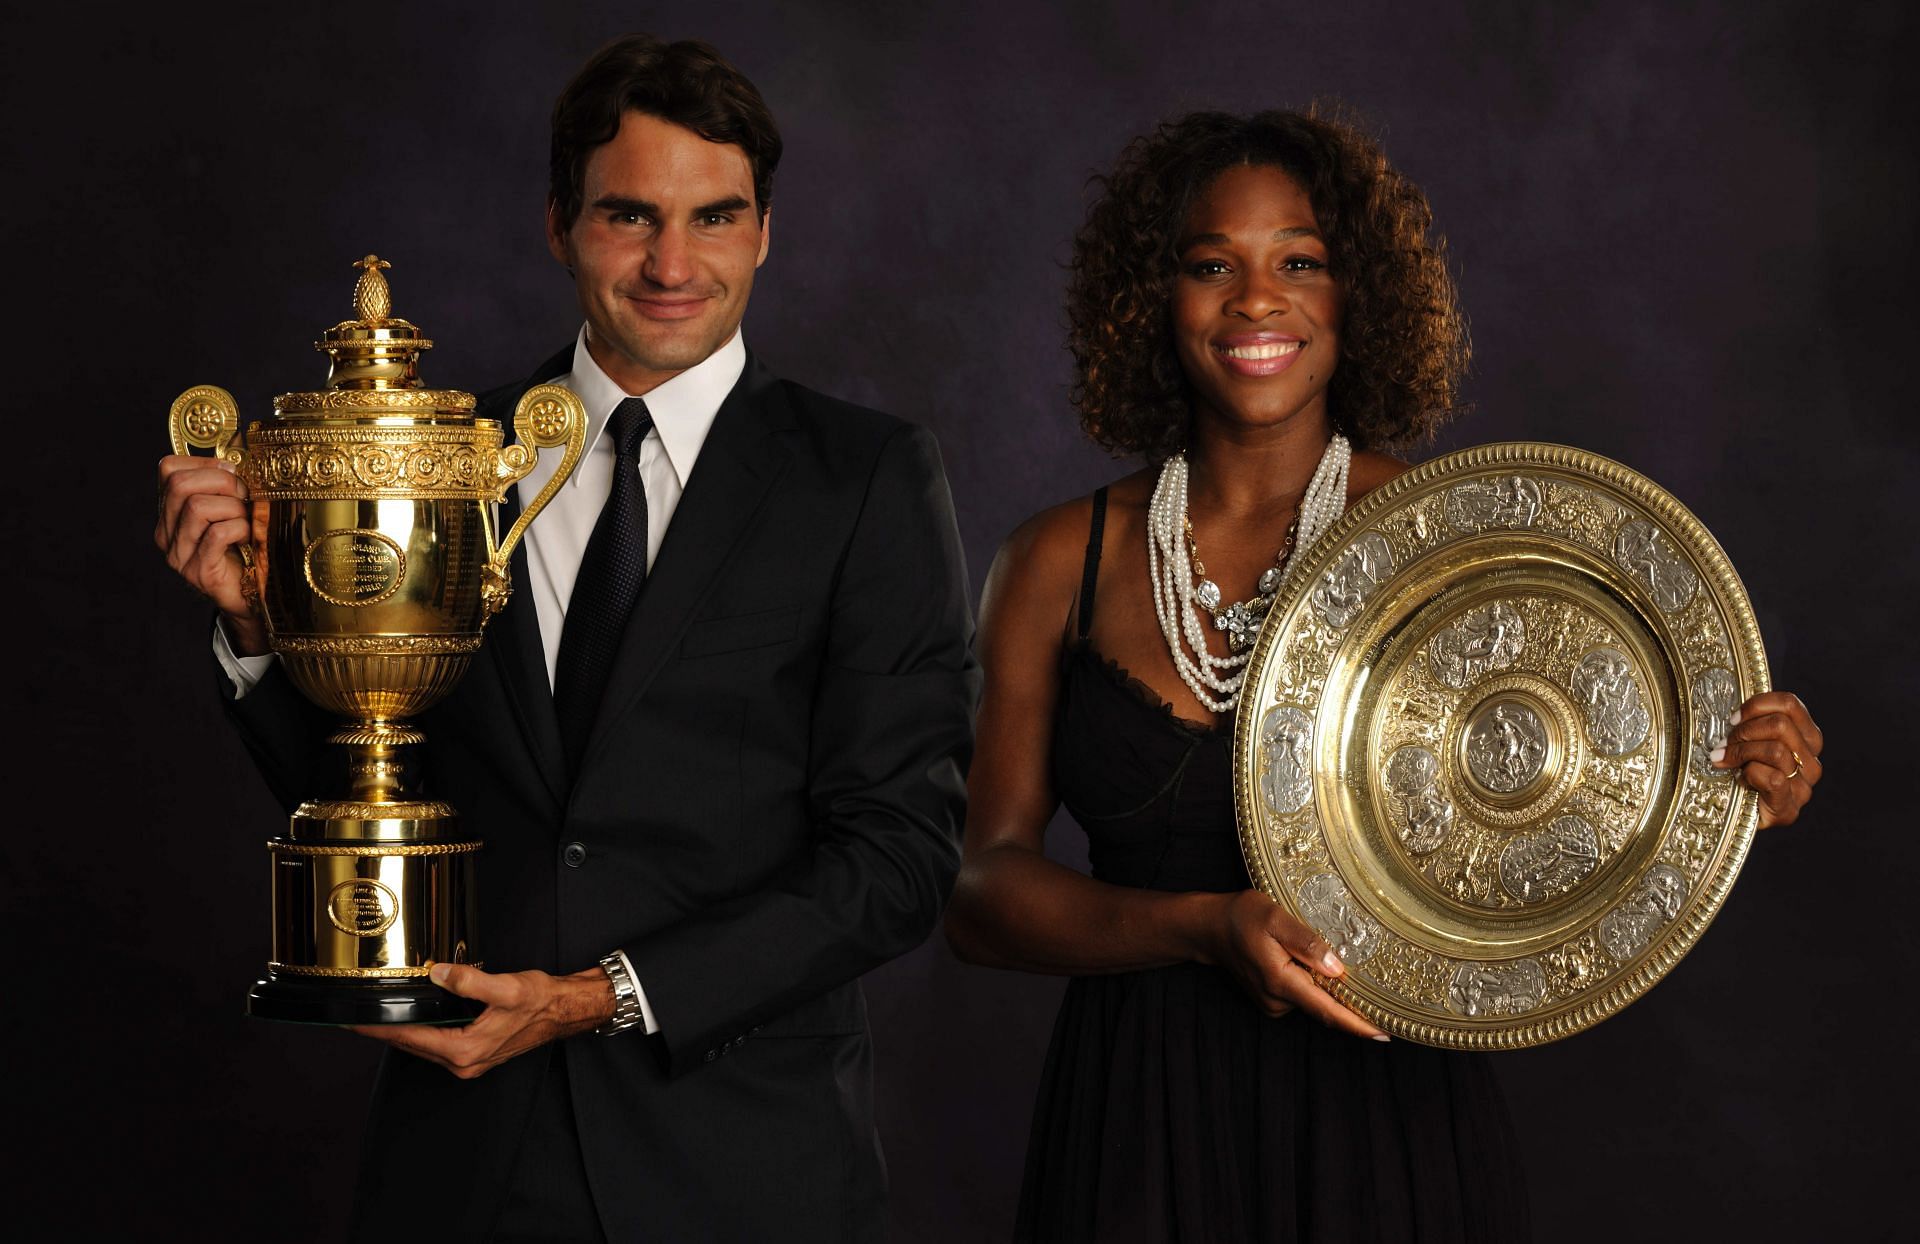 Roger Federer and Serena Williams - Wimbledon champions of 2009